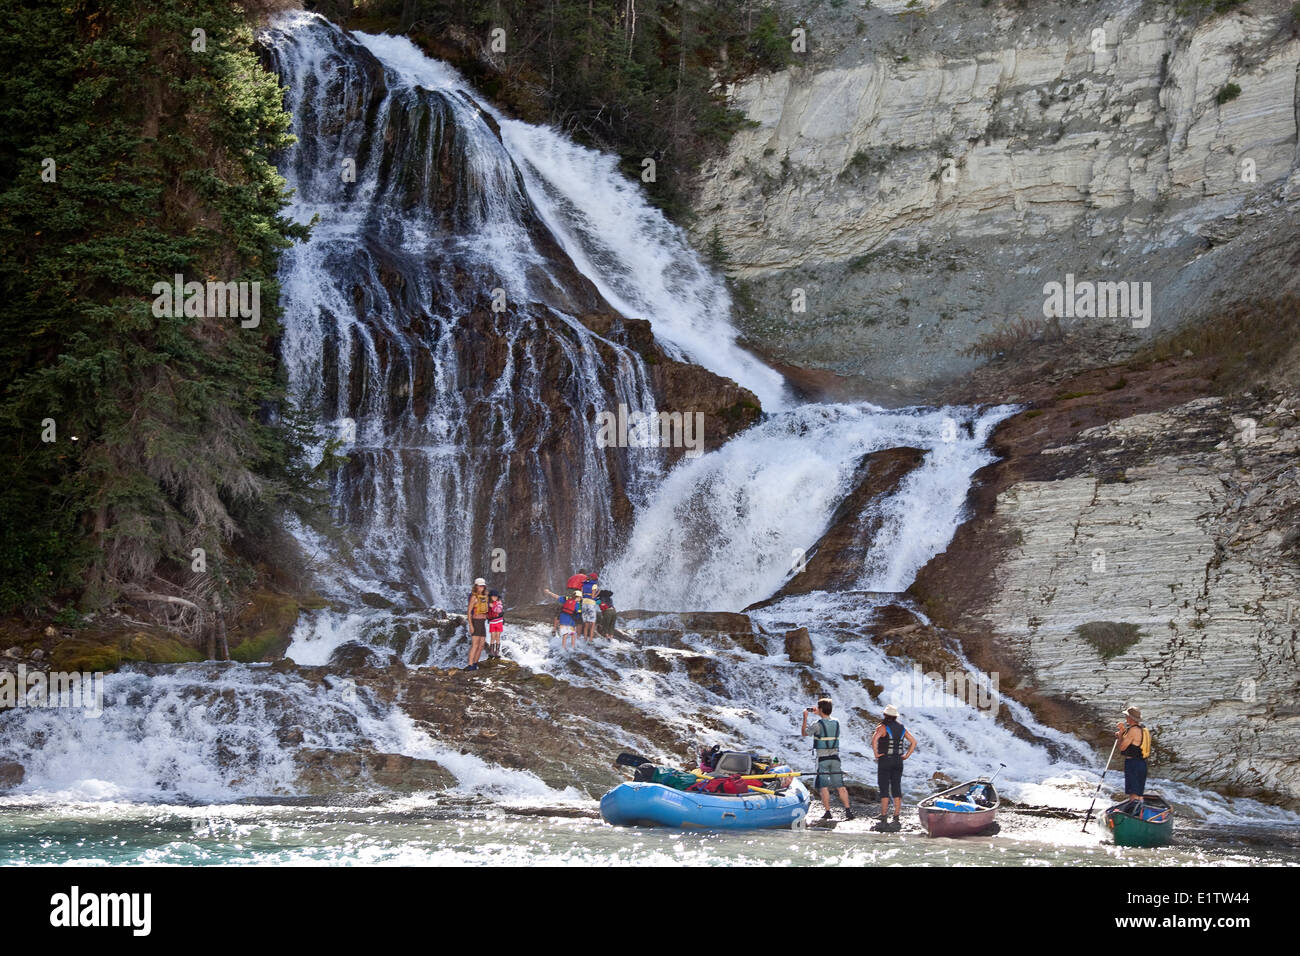 Several families enjoy river trip in canoes and one raft on Kootenay River, Kootenay National Park, BC, Canada. Stock Photo